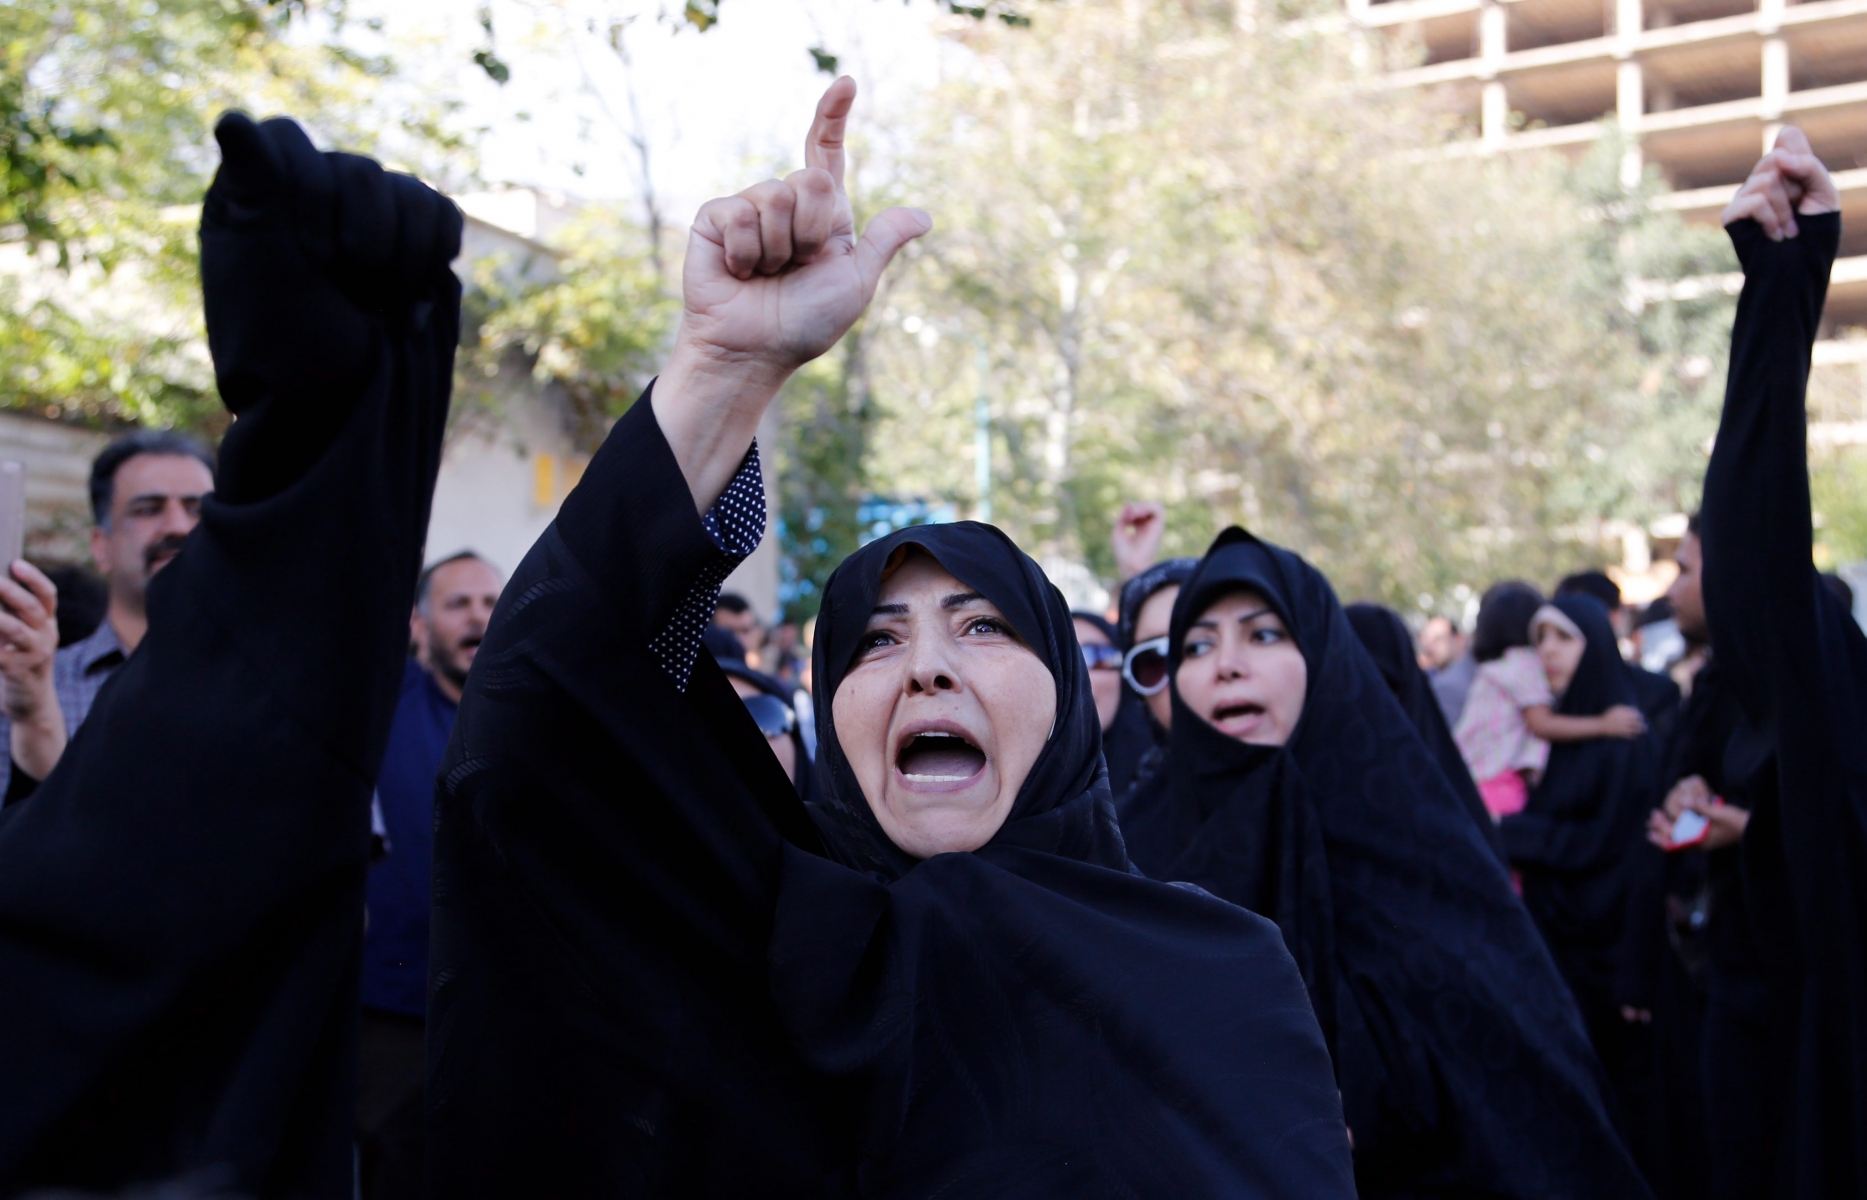 epa04952680 Iranian demonstrators chant slogans during a protest against Saudi Arabia over the hajj stampede in front of the Saudi embassy in Tehran, Iran, 27 September 2015. Iran's Supreme Leader Ali Khamenei on 27 September demanded Saudi Arabia apologize for this week's haj stampede in which 769 pilgrims died, including 144 Iranians. Iran has in the past few days been scathingly critical of its regional rival, Saudi Arabia, accusing it of mishandling the haj. Saudi media has accused Iran of trying to make political gains from the catastrophe.  EPA/ABEDIN TAHERKENAREH